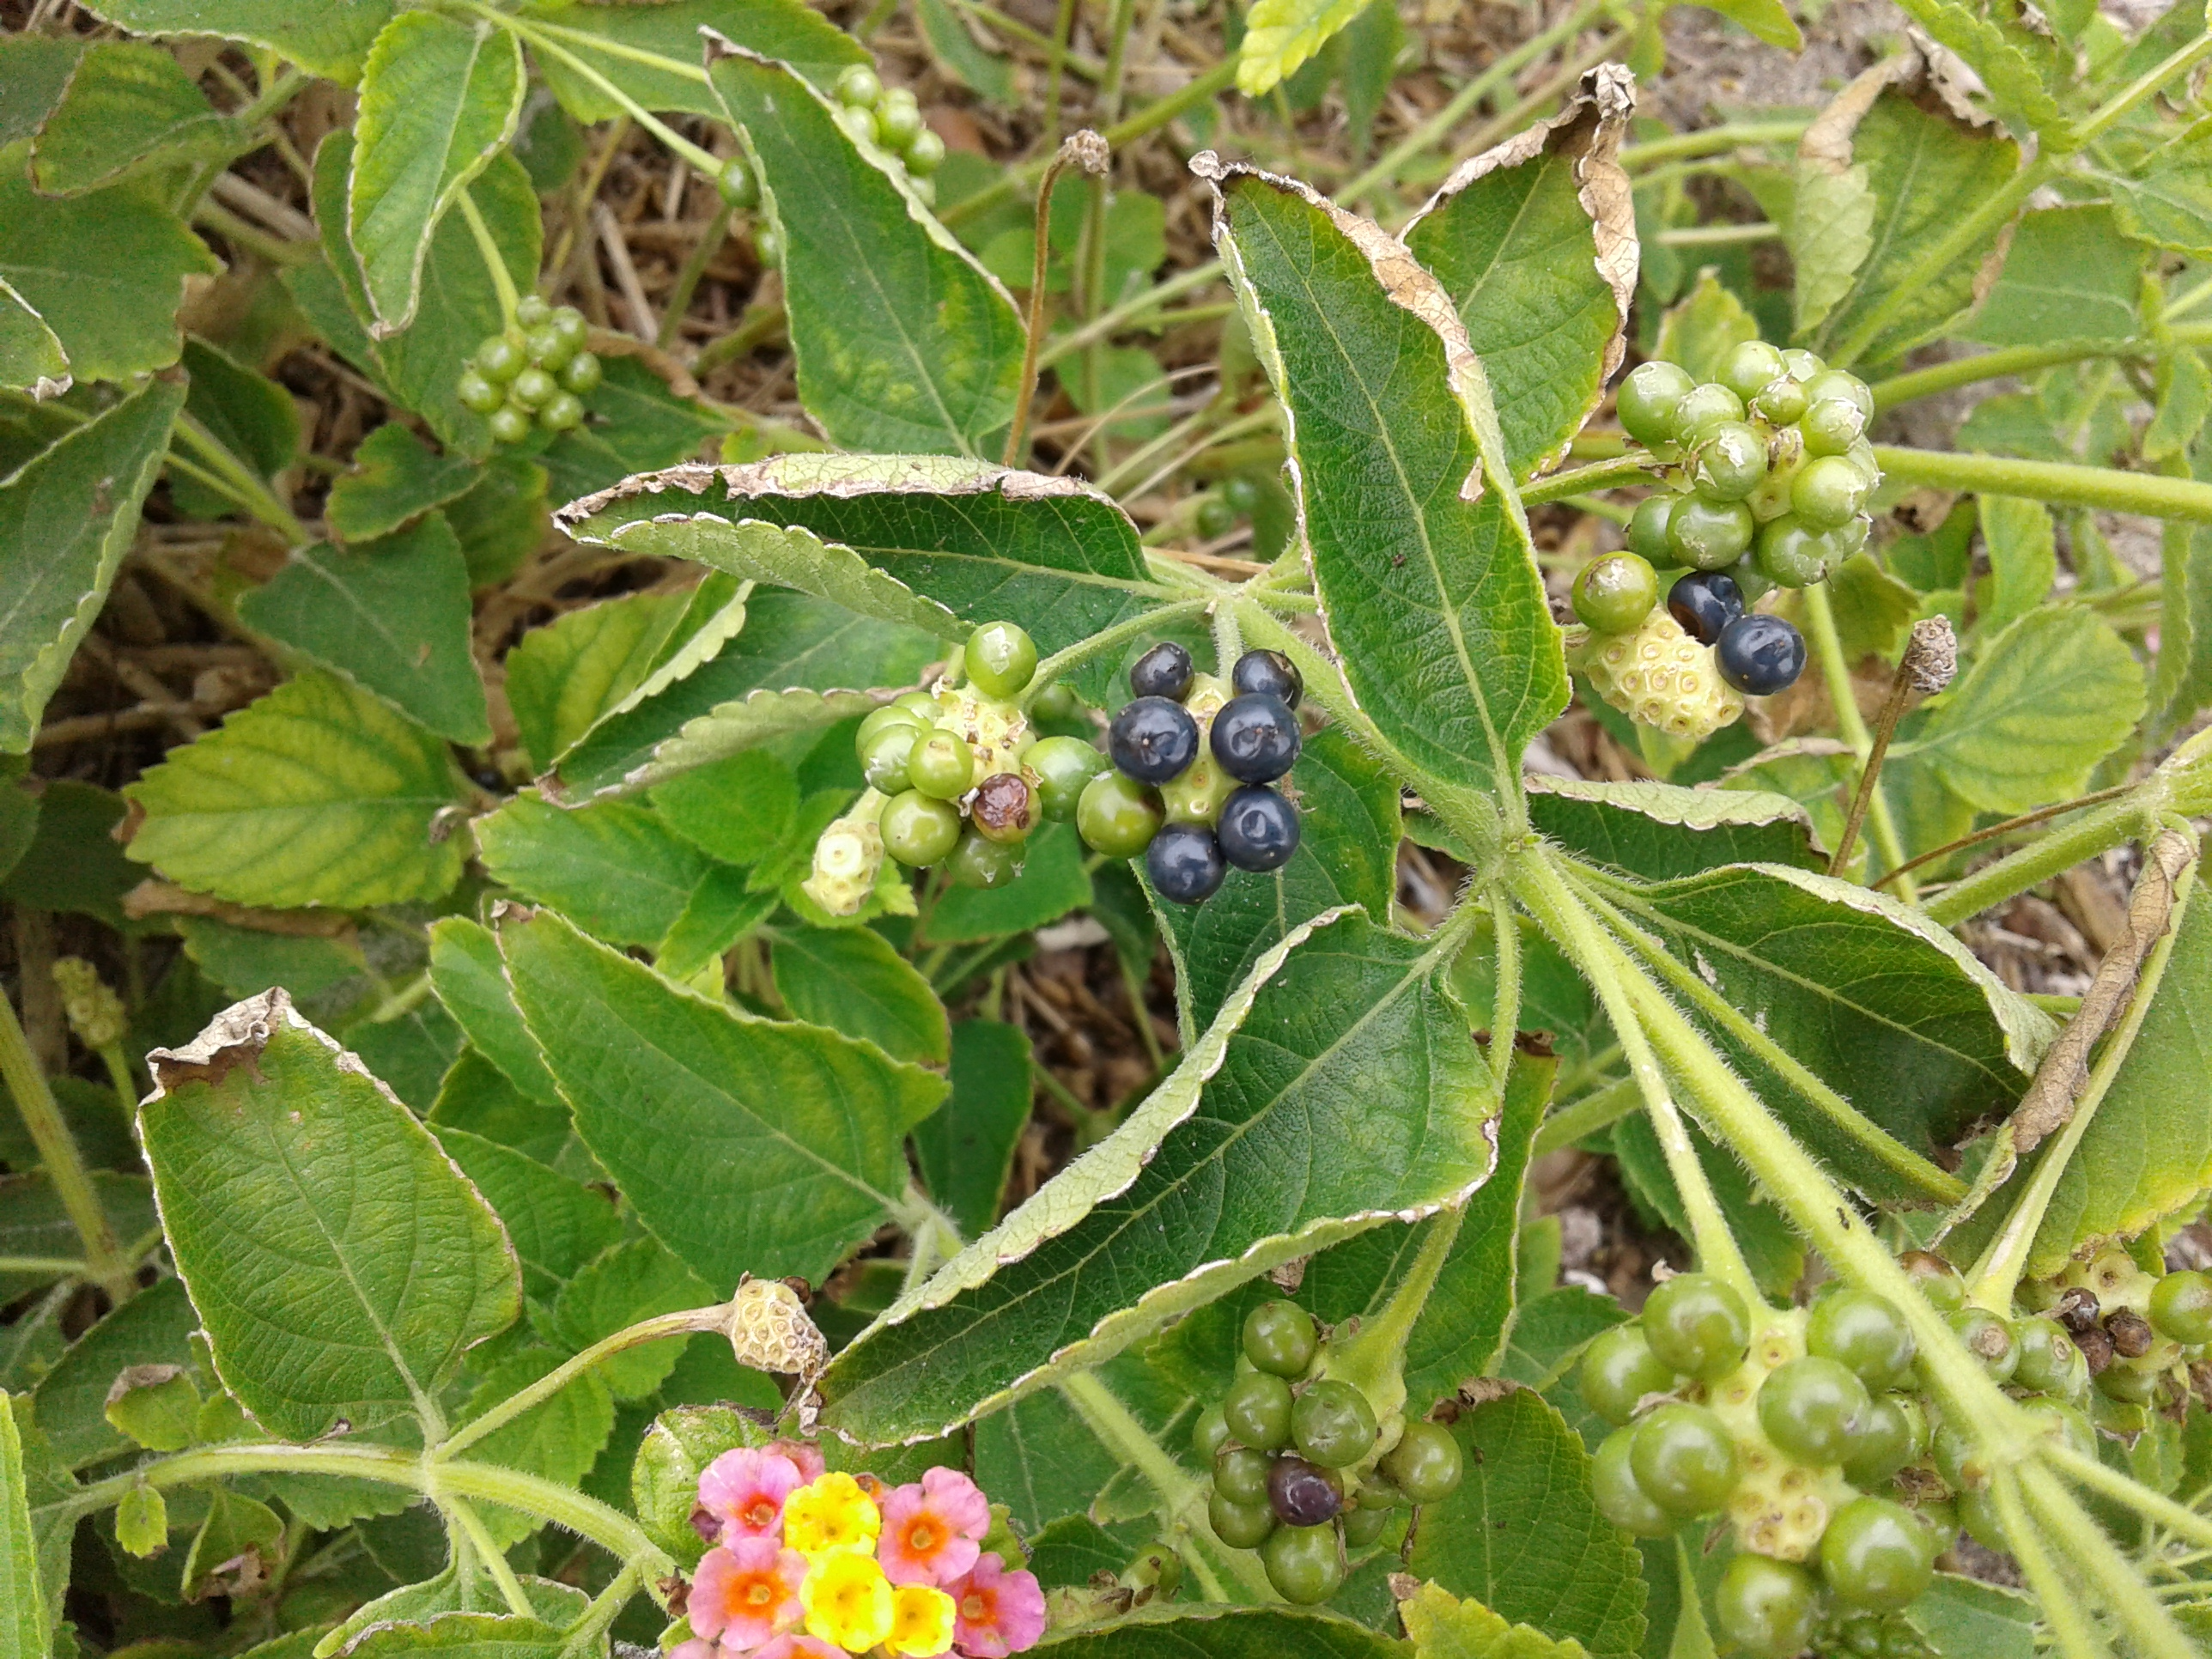 Berries growing on a green plant.